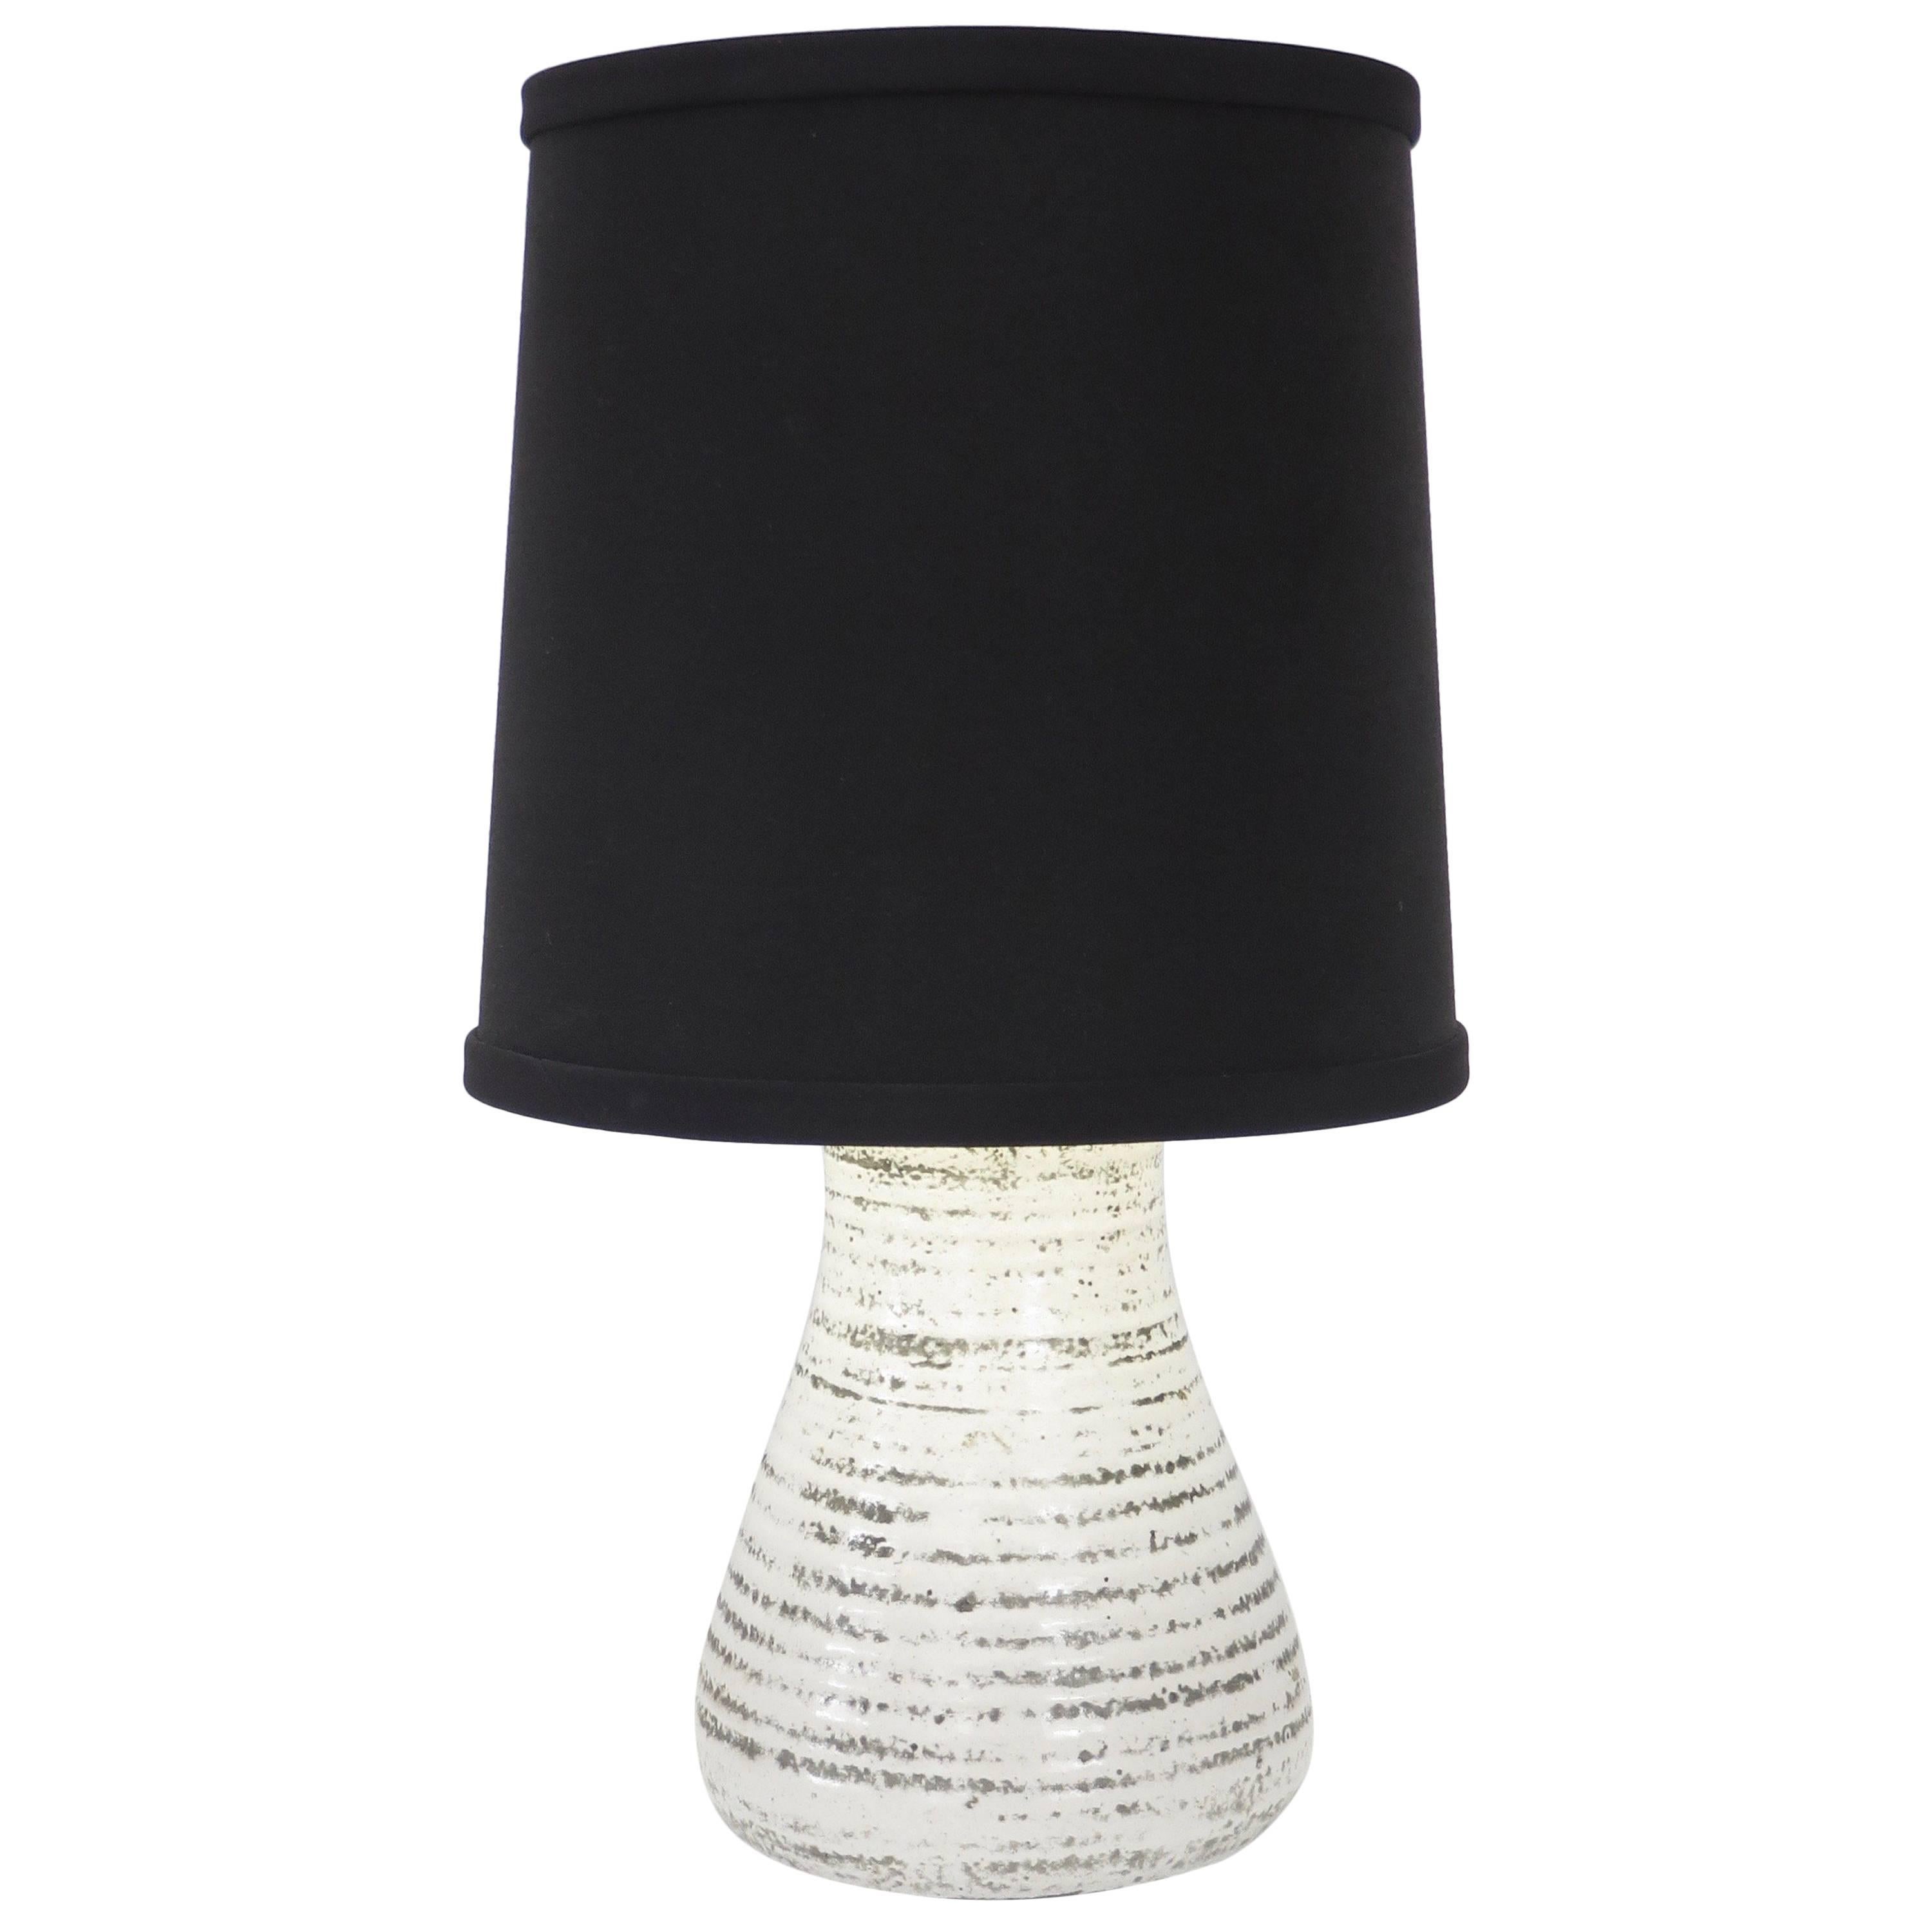 French Ceramic Table Lamp by French Pottery Studio Accolay in Vallauris